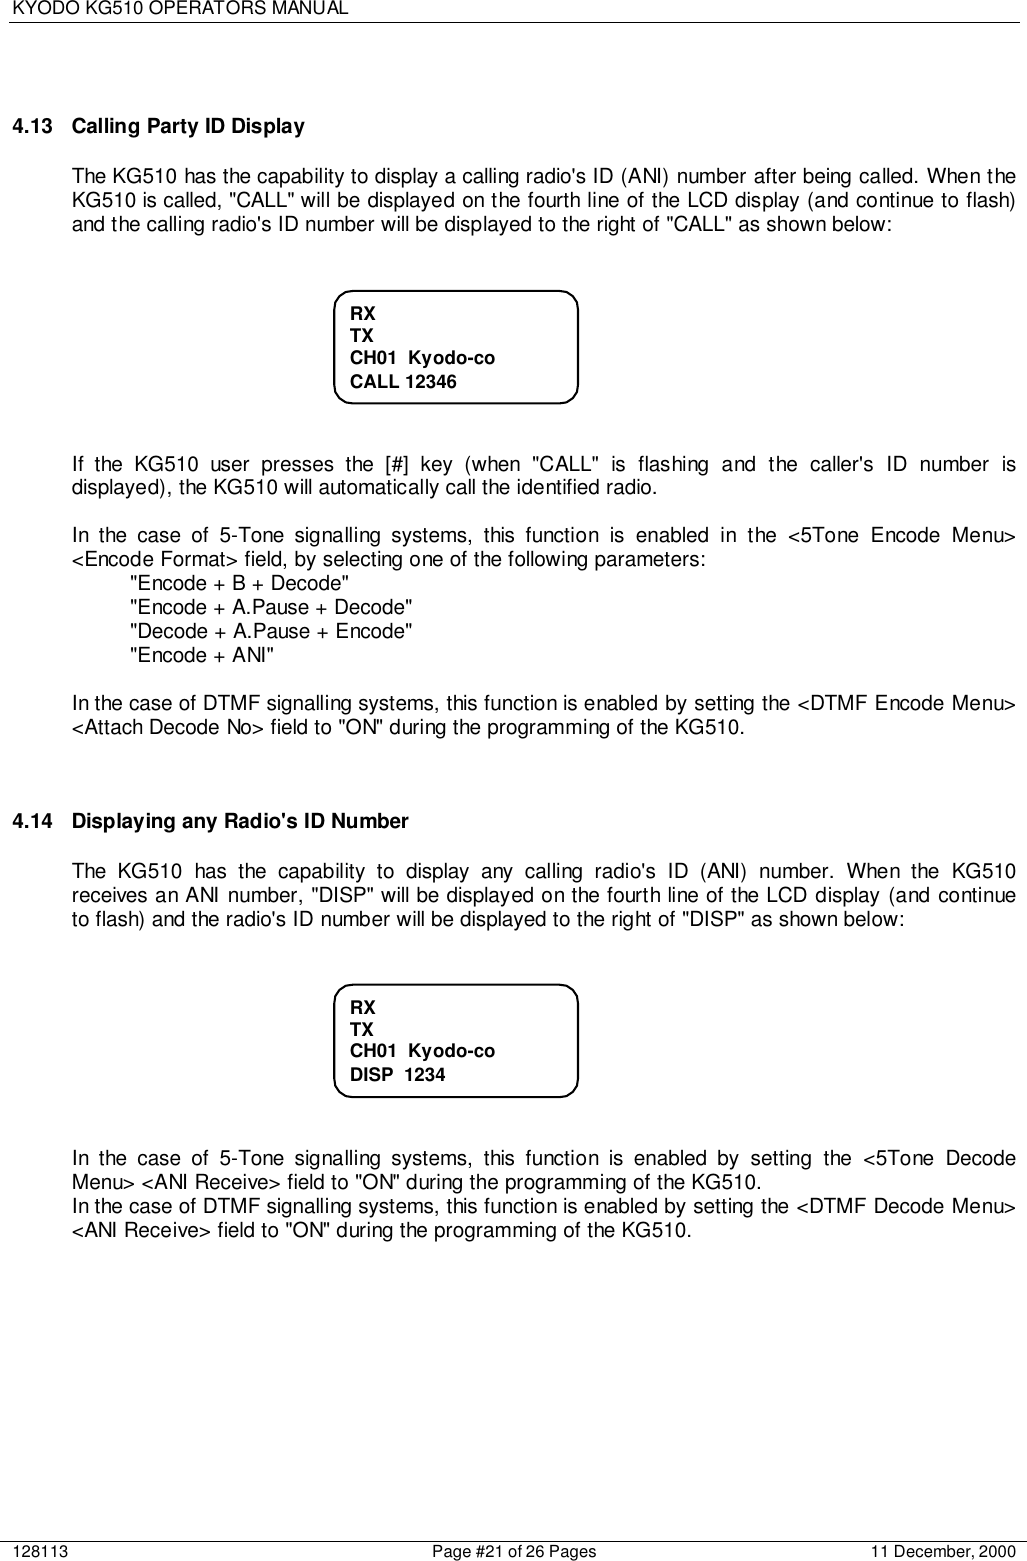 KYODO KG510 OPERATORS MANUAL128113 Page #21 of 26 Pages 11 December, 20004.13  Calling Party ID DisplayThe KG510 has the capability to display a calling radio&apos;s ID (ANI) number after being called. When theKG510 is called, &quot;CALL&quot; will be displayed on the fourth line of the LCD display (and continue to flash)and the calling radio&apos;s ID number will be displayed to the right of &quot;CALL&quot; as shown below:If the KG510 user presses the [#] key (when &quot;CALL&quot; is flashing and the caller&apos;s ID number isdisplayed), the KG510 will automatically call the identified radio.In the case of 5-Tone signalling systems, this function is enabled in the &lt;5Tone Encode Menu&gt;&lt;Encode Format&gt; field, by selecting one of the following parameters:&quot;Encode + B + Decode&quot;&quot;Encode + A.Pause + Decode&quot;&quot;Decode + A.Pause + Encode&quot;&quot;Encode + ANI&quot;In the case of DTMF signalling systems, this function is enabled by setting the &lt;DTMF Encode Menu&gt;&lt;Attach Decode No&gt; field to &quot;ON&quot; during the programming of the KG510.4.14  Displaying any Radio&apos;s ID NumberThe KG510 has the capability to display any calling radio&apos;s ID (ANI) number. When the KG510receives an ANI number, &quot;DISP&quot; will be displayed on the fourth line of the LCD display (and continueto flash) and the radio&apos;s ID number will be displayed to the right of &quot;DISP&quot; as shown below:In the case of 5-Tone signalling systems, this function is enabled by setting the &lt;5Tone DecodeMenu&gt; &lt;ANI Receive&gt; field to &quot;ON&quot; during the programming of the KG510.In the case of DTMF signalling systems, this function is enabled by setting the &lt;DTMF Decode Menu&gt;&lt;ANI Receive&gt; field to &quot;ON&quot; during the programming of the KG510.RXTXCH01  Kyodo-coCALL 12346RXTXCH01  Kyodo-coDISP  1234